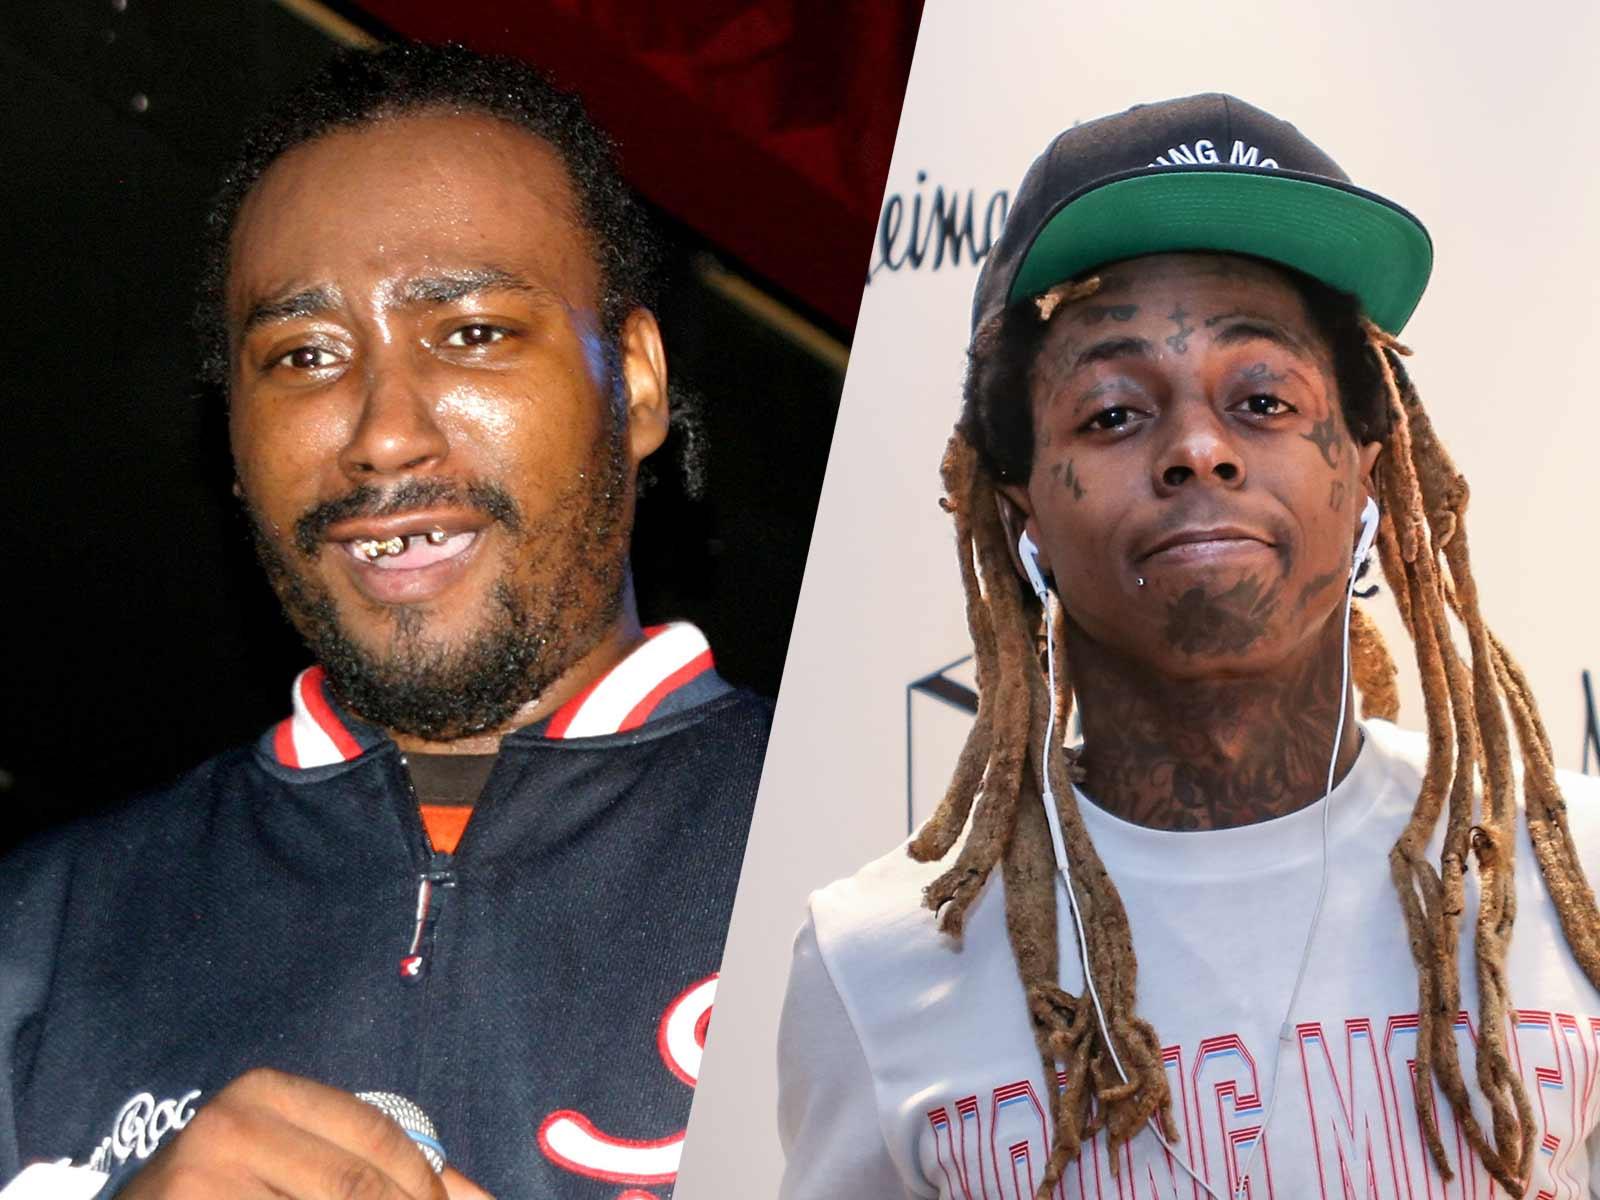 Lil Wayne Stakes a Claim for ‘New Dirty Bastard,’ ODB Family Left in the Dark